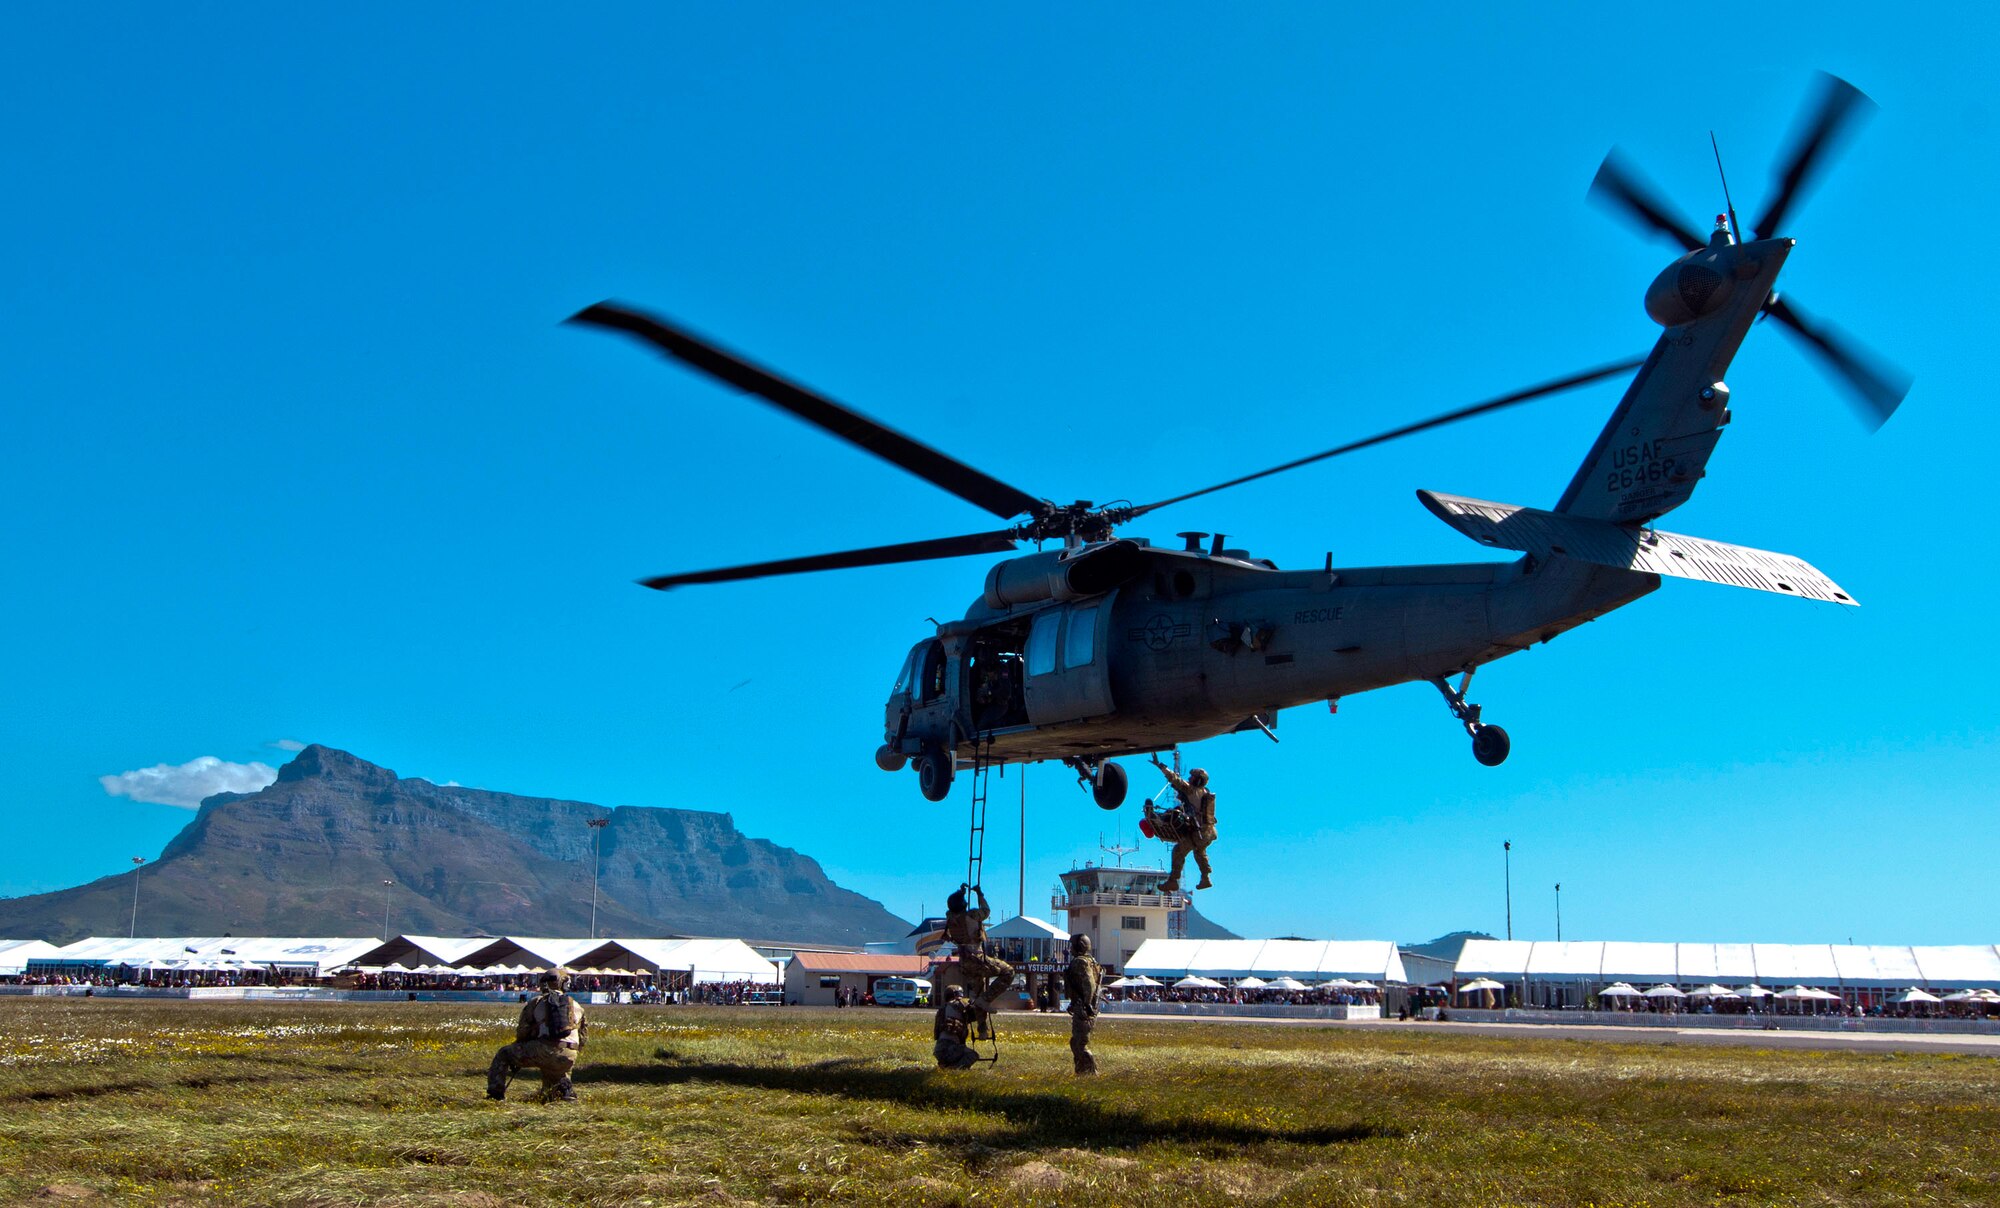 Members of the 106th Rescue Wing demonstrate the capabilities of an HH-60 Pave Hawk helicopter during a previous visit visit to South African in 2010. (New York State Division of Military & Naval Affairs courtesy photo) (Released)